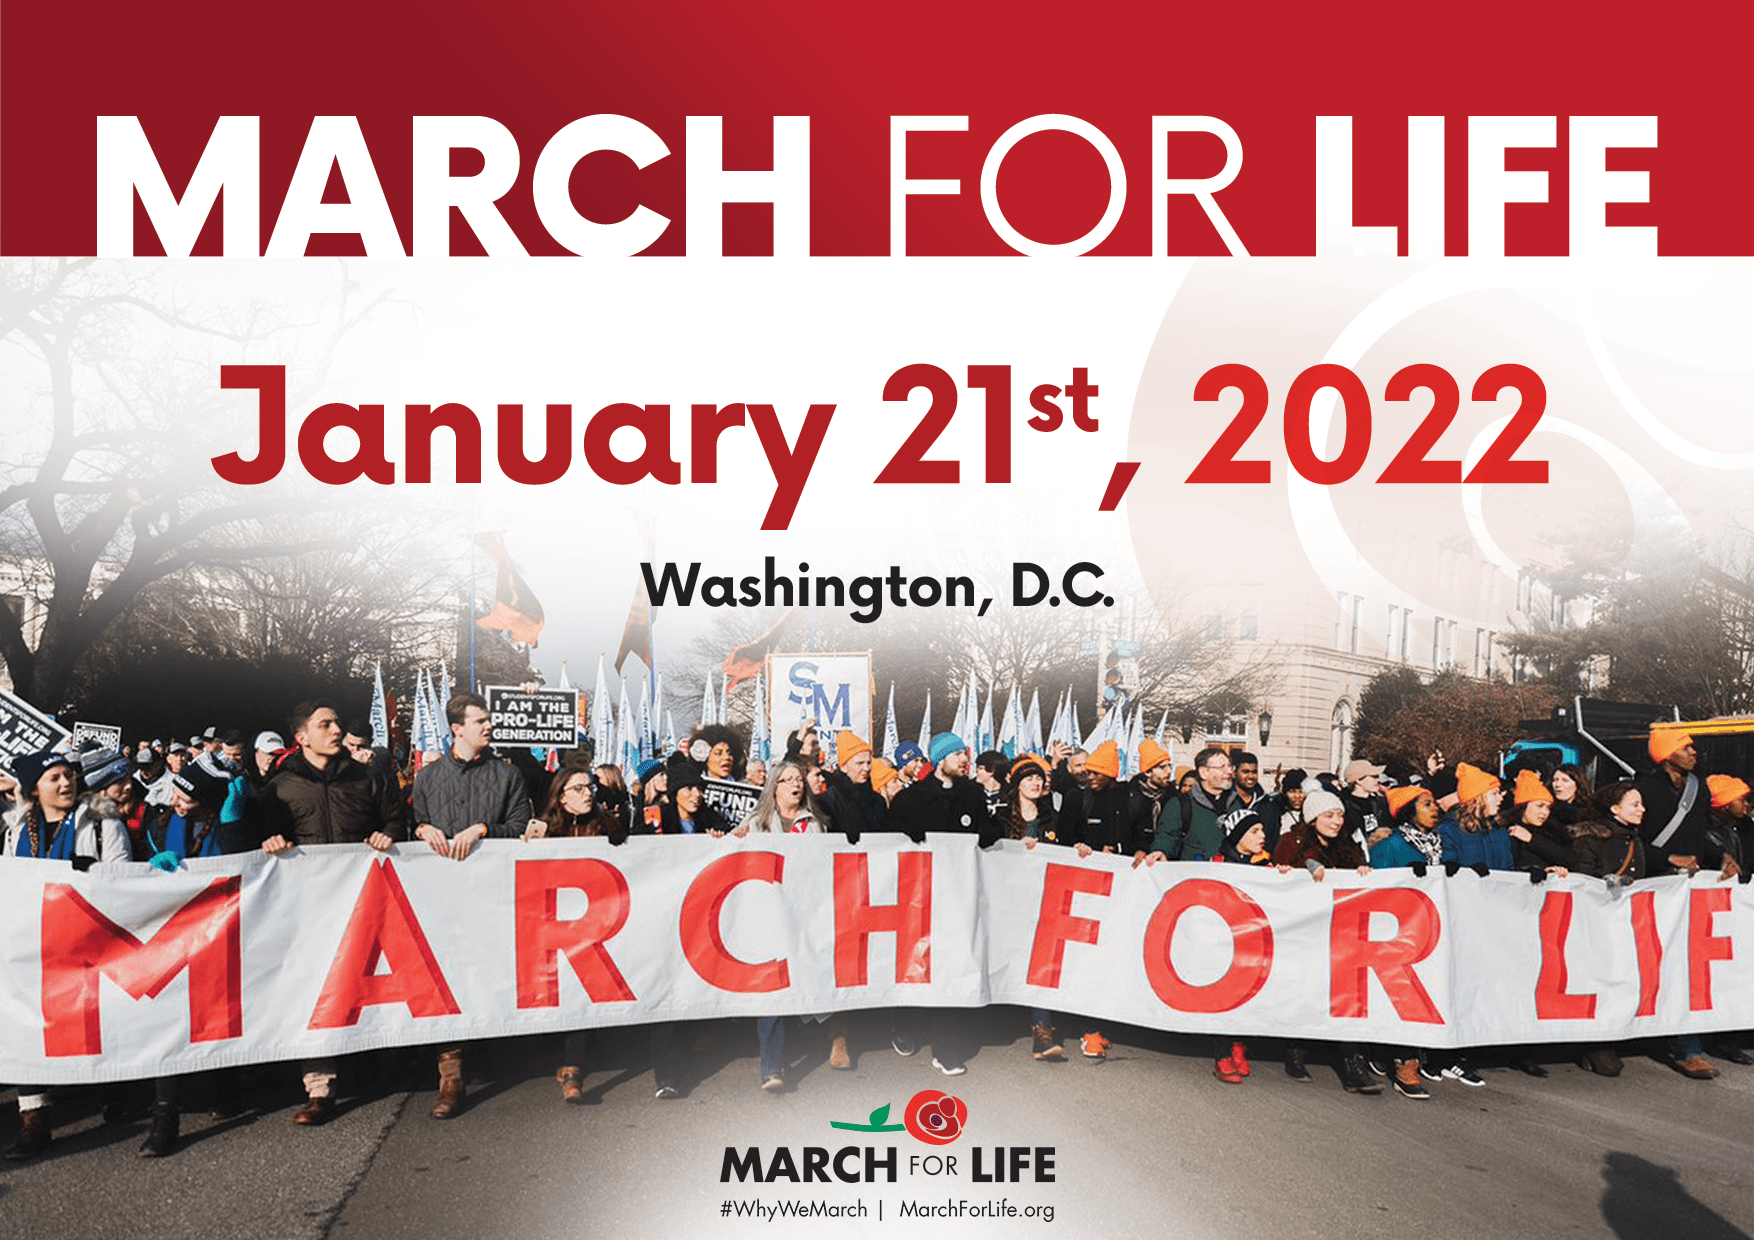 March For Life 2022 Schedule Downloads - March For Life